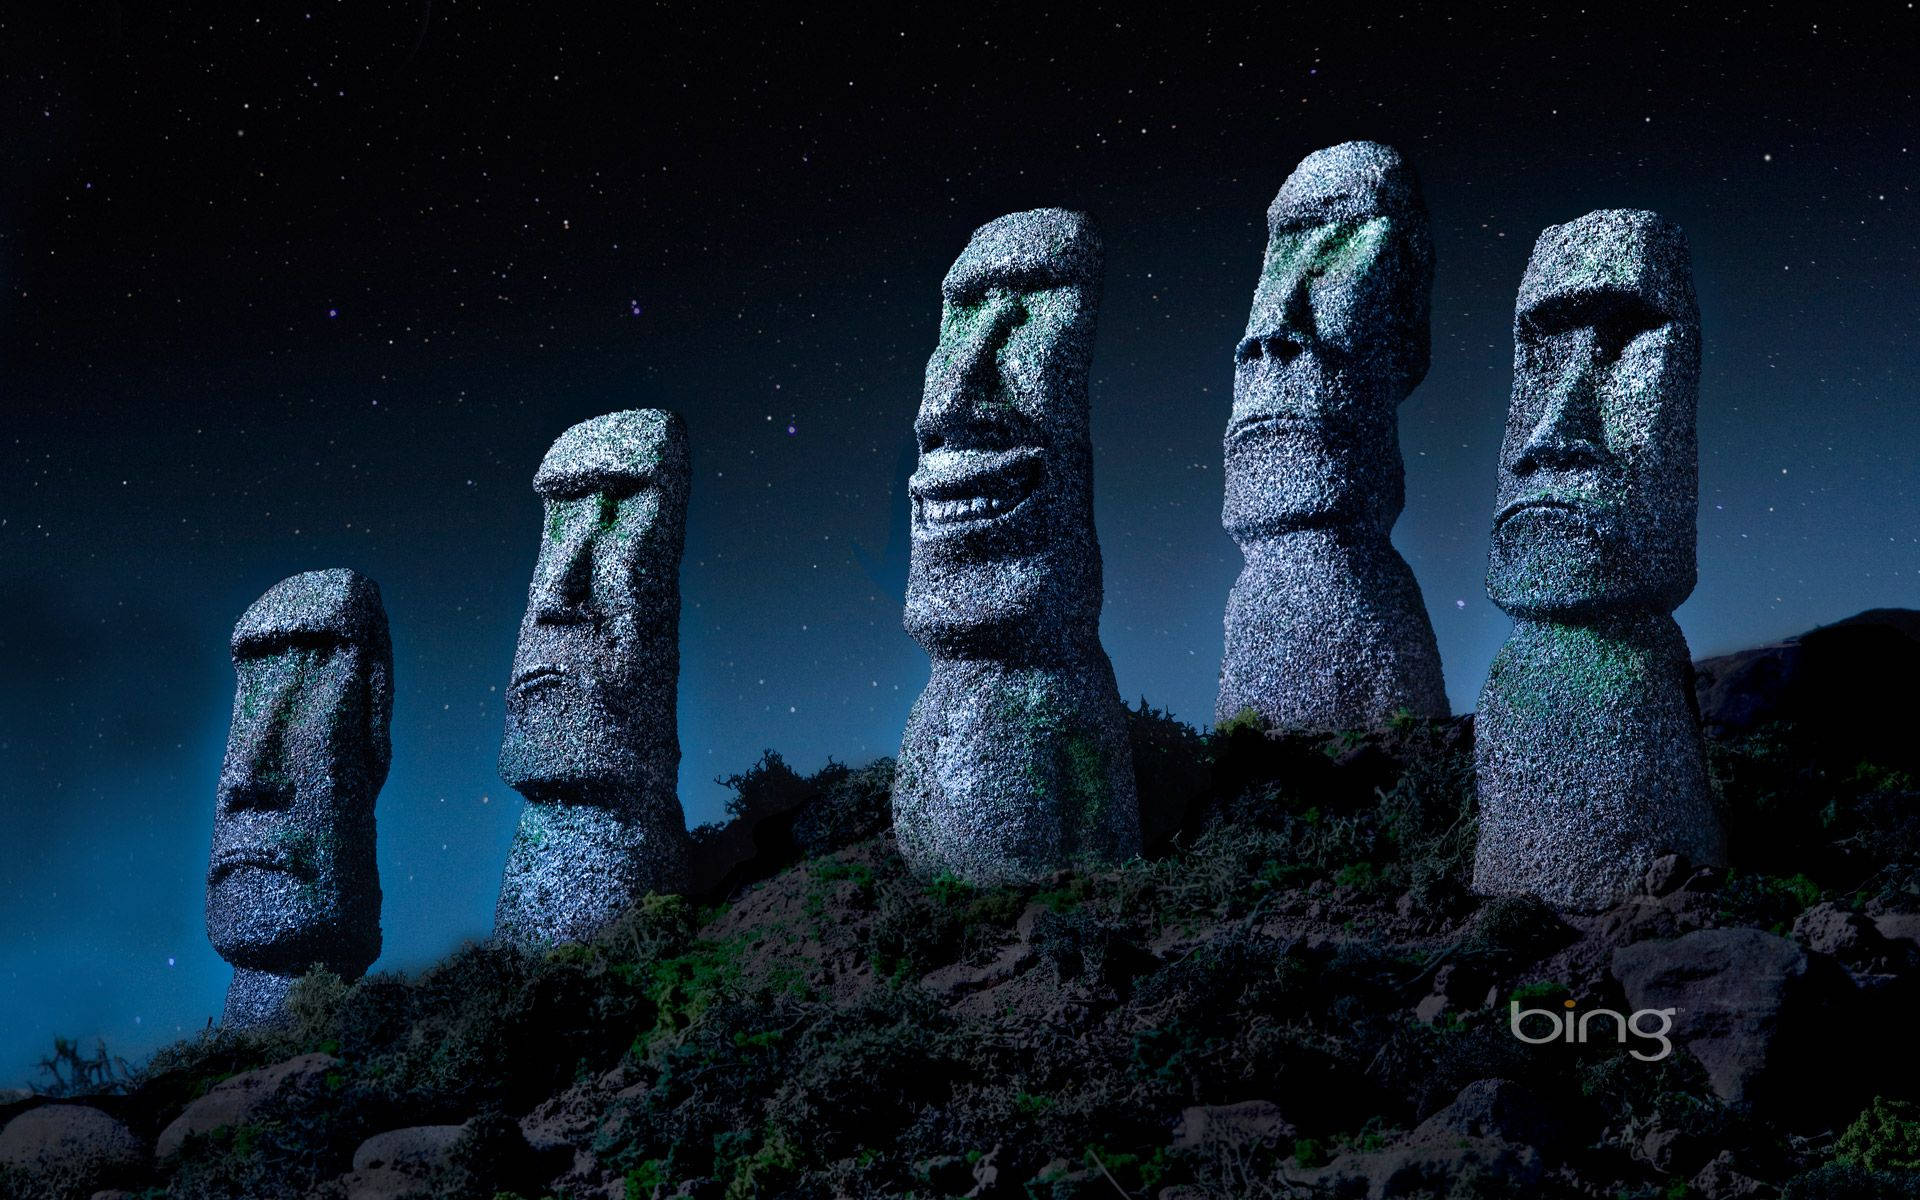 Stone Faces Bing Hd Cover